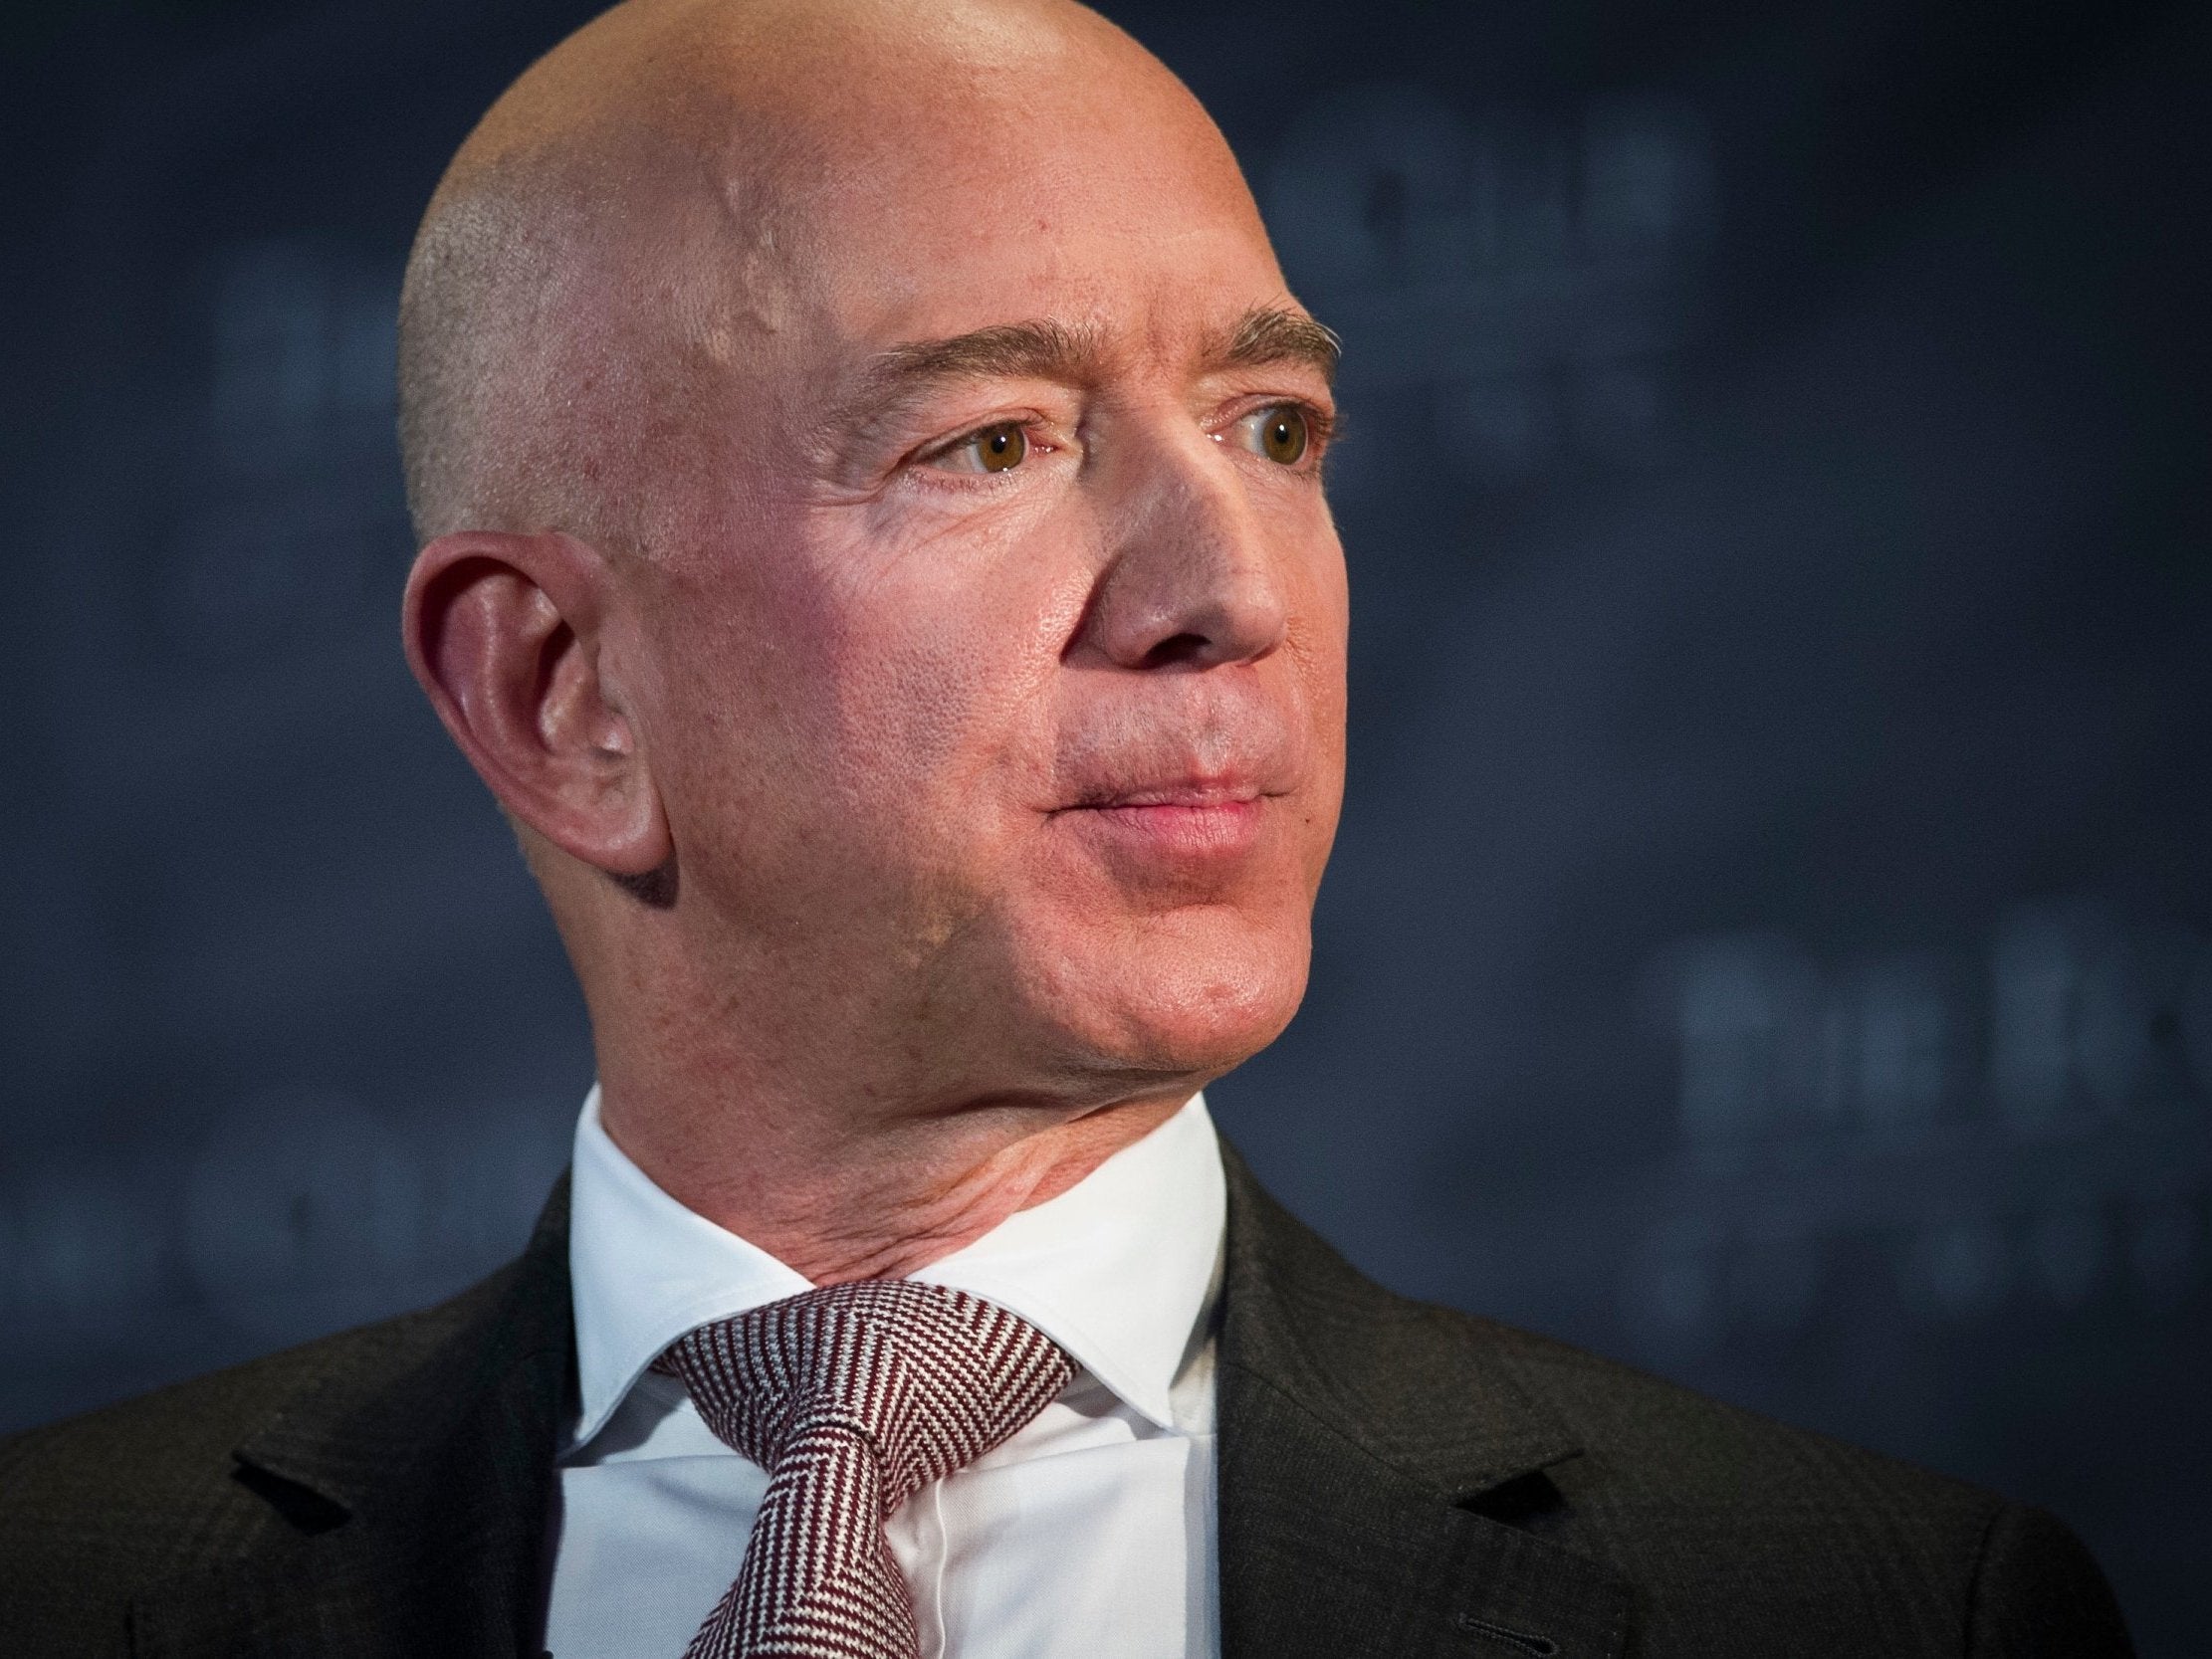 Bezos is not to be messed with. He’s taken over the internet. His next mission is space